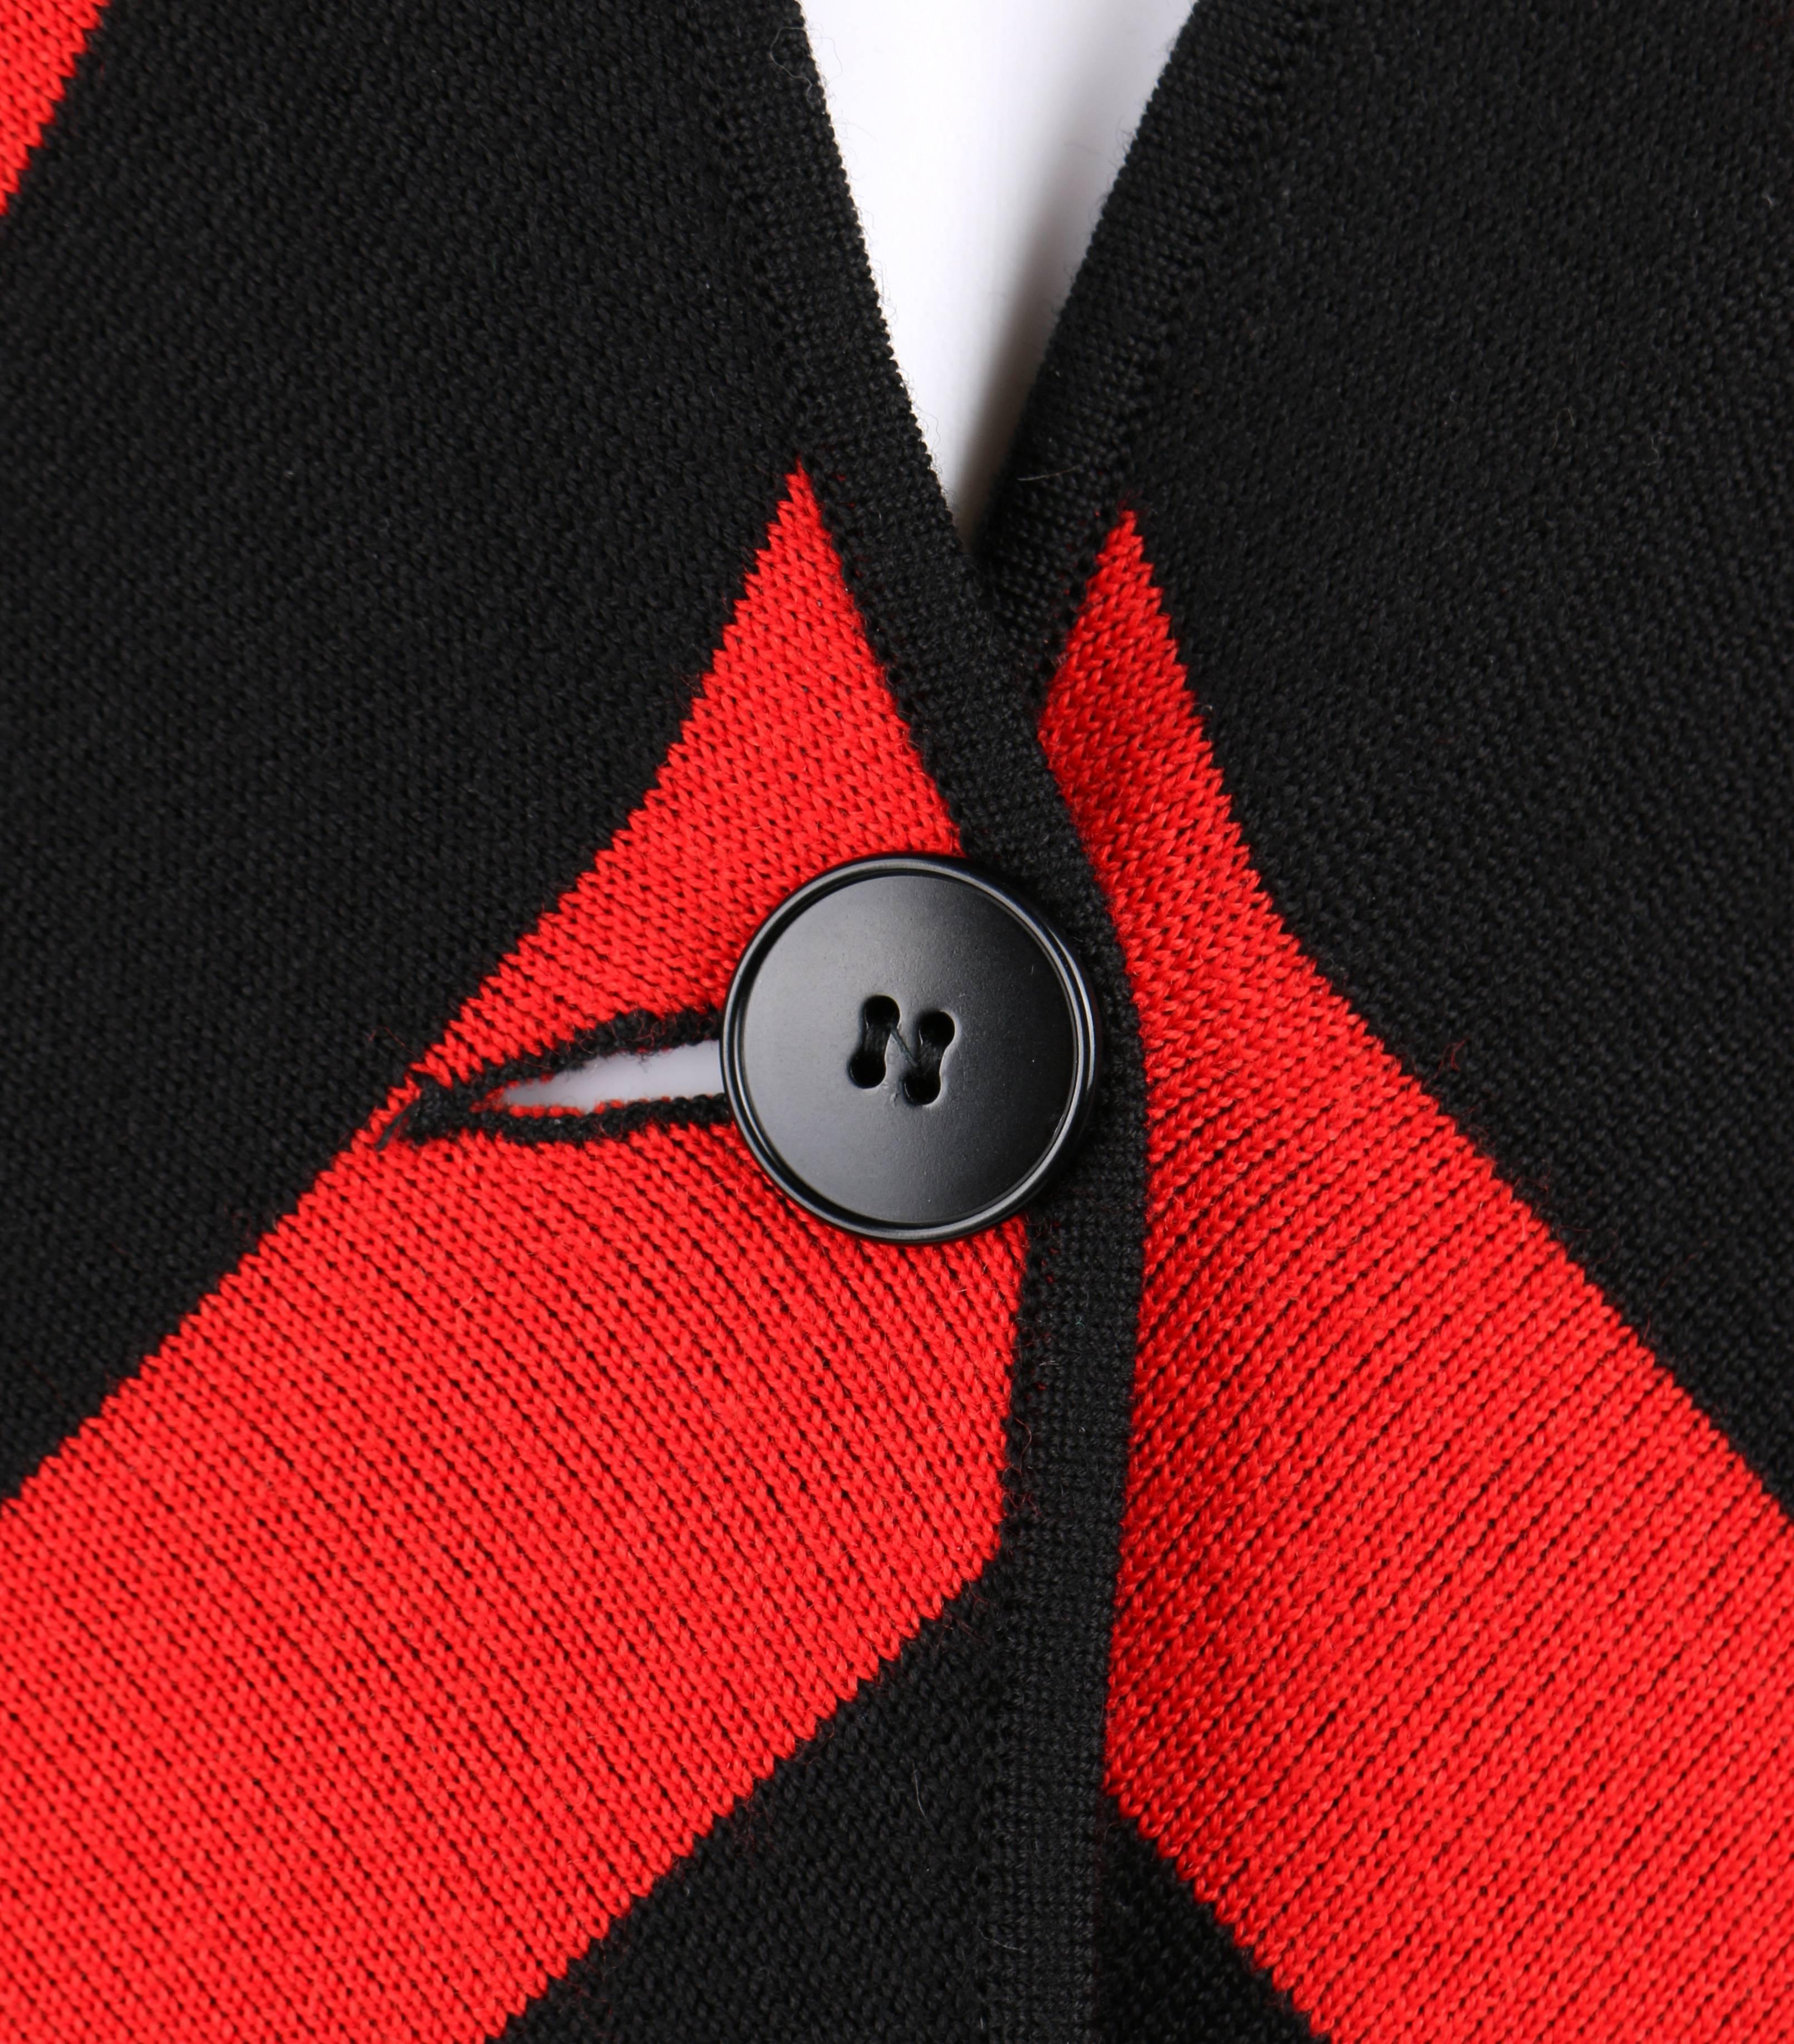 GIVENCHY COUTURE A/W 1998 ALEXANDER McQUEEN Black Red Stripe Wool Knit Blazer  For Sale 4